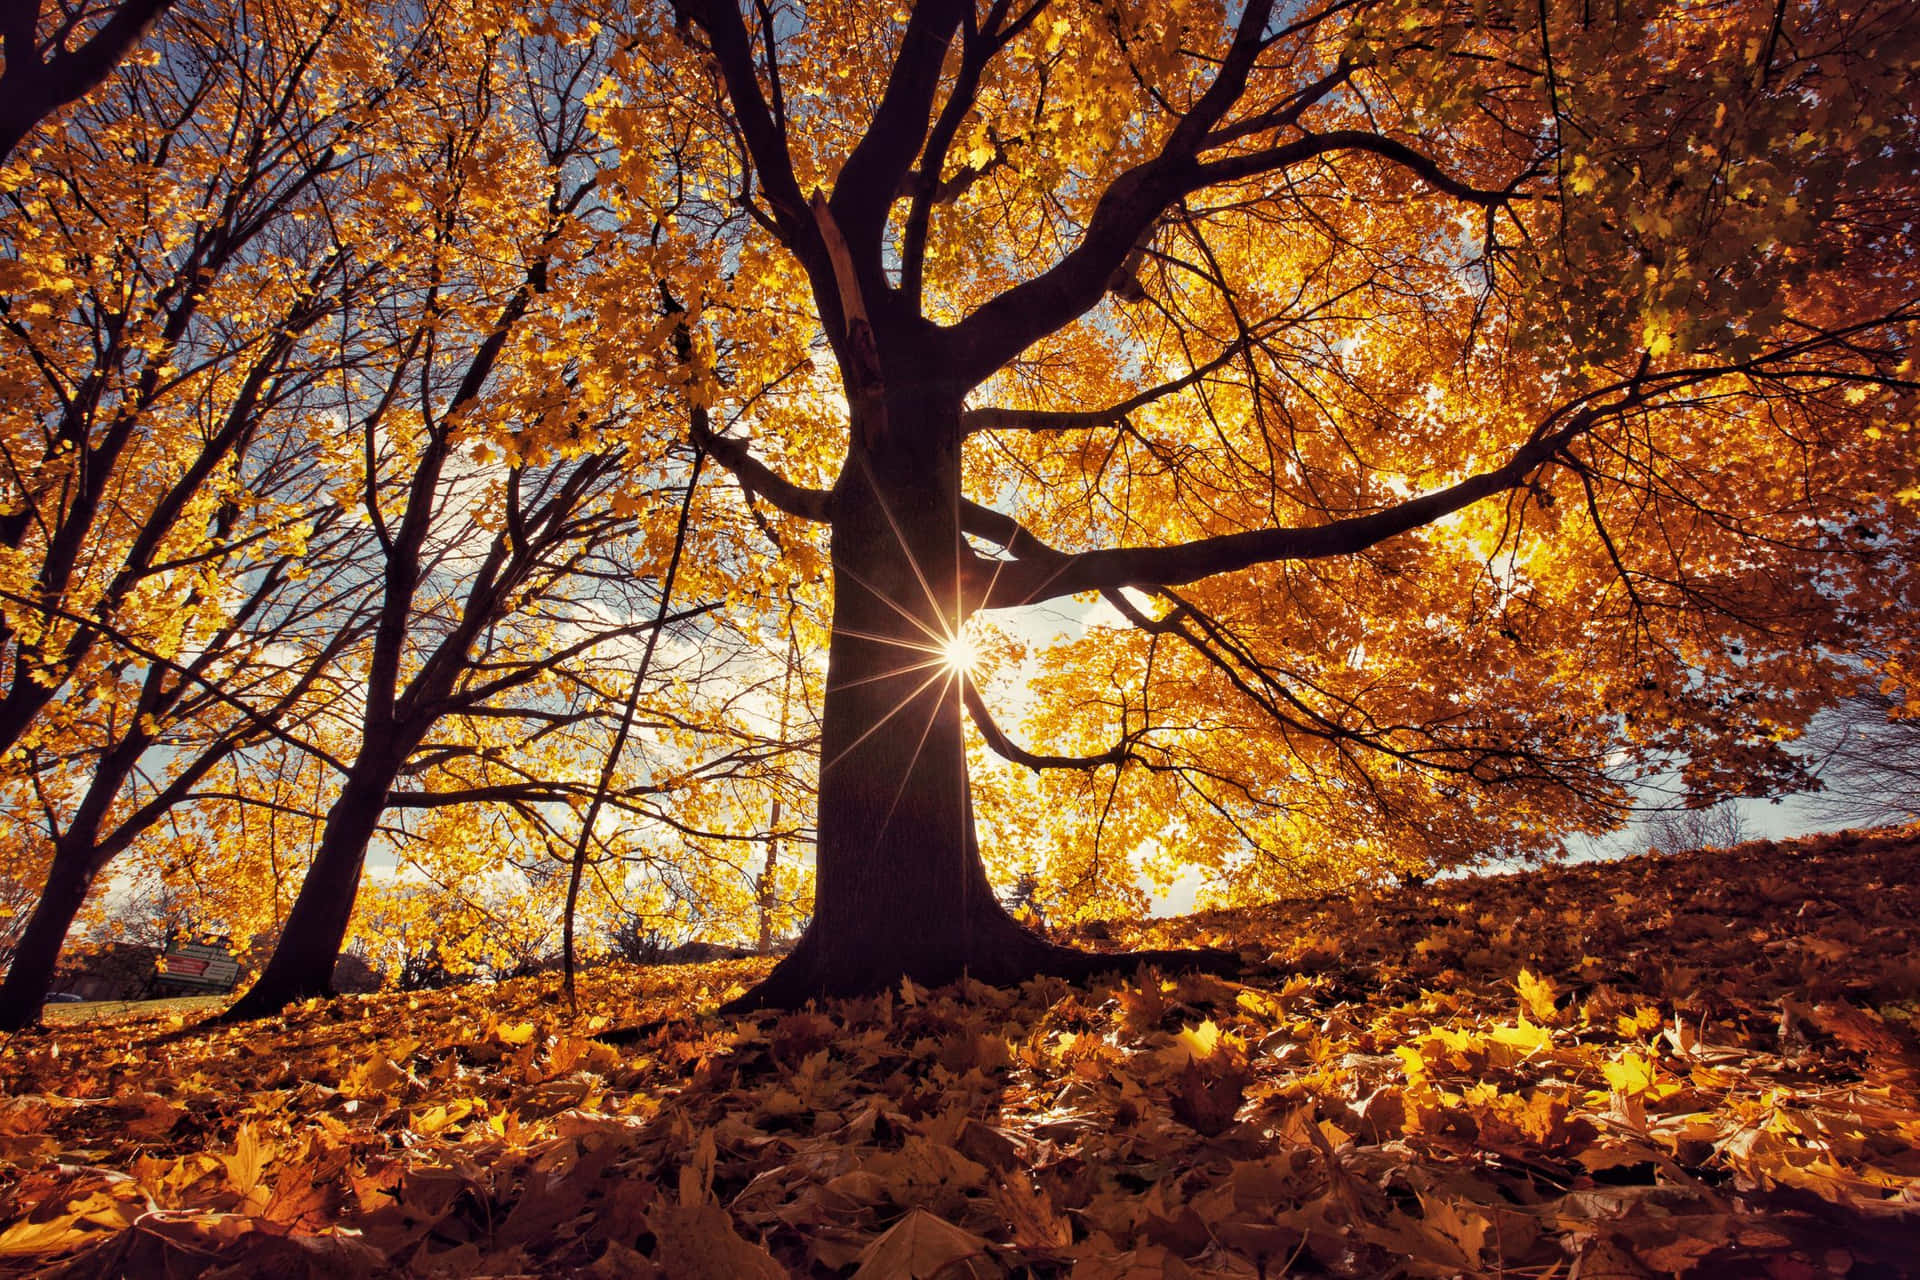 Bright Sunlight Covered By Beautiful Fall Tree Pictures 2121 x 1414 Picture